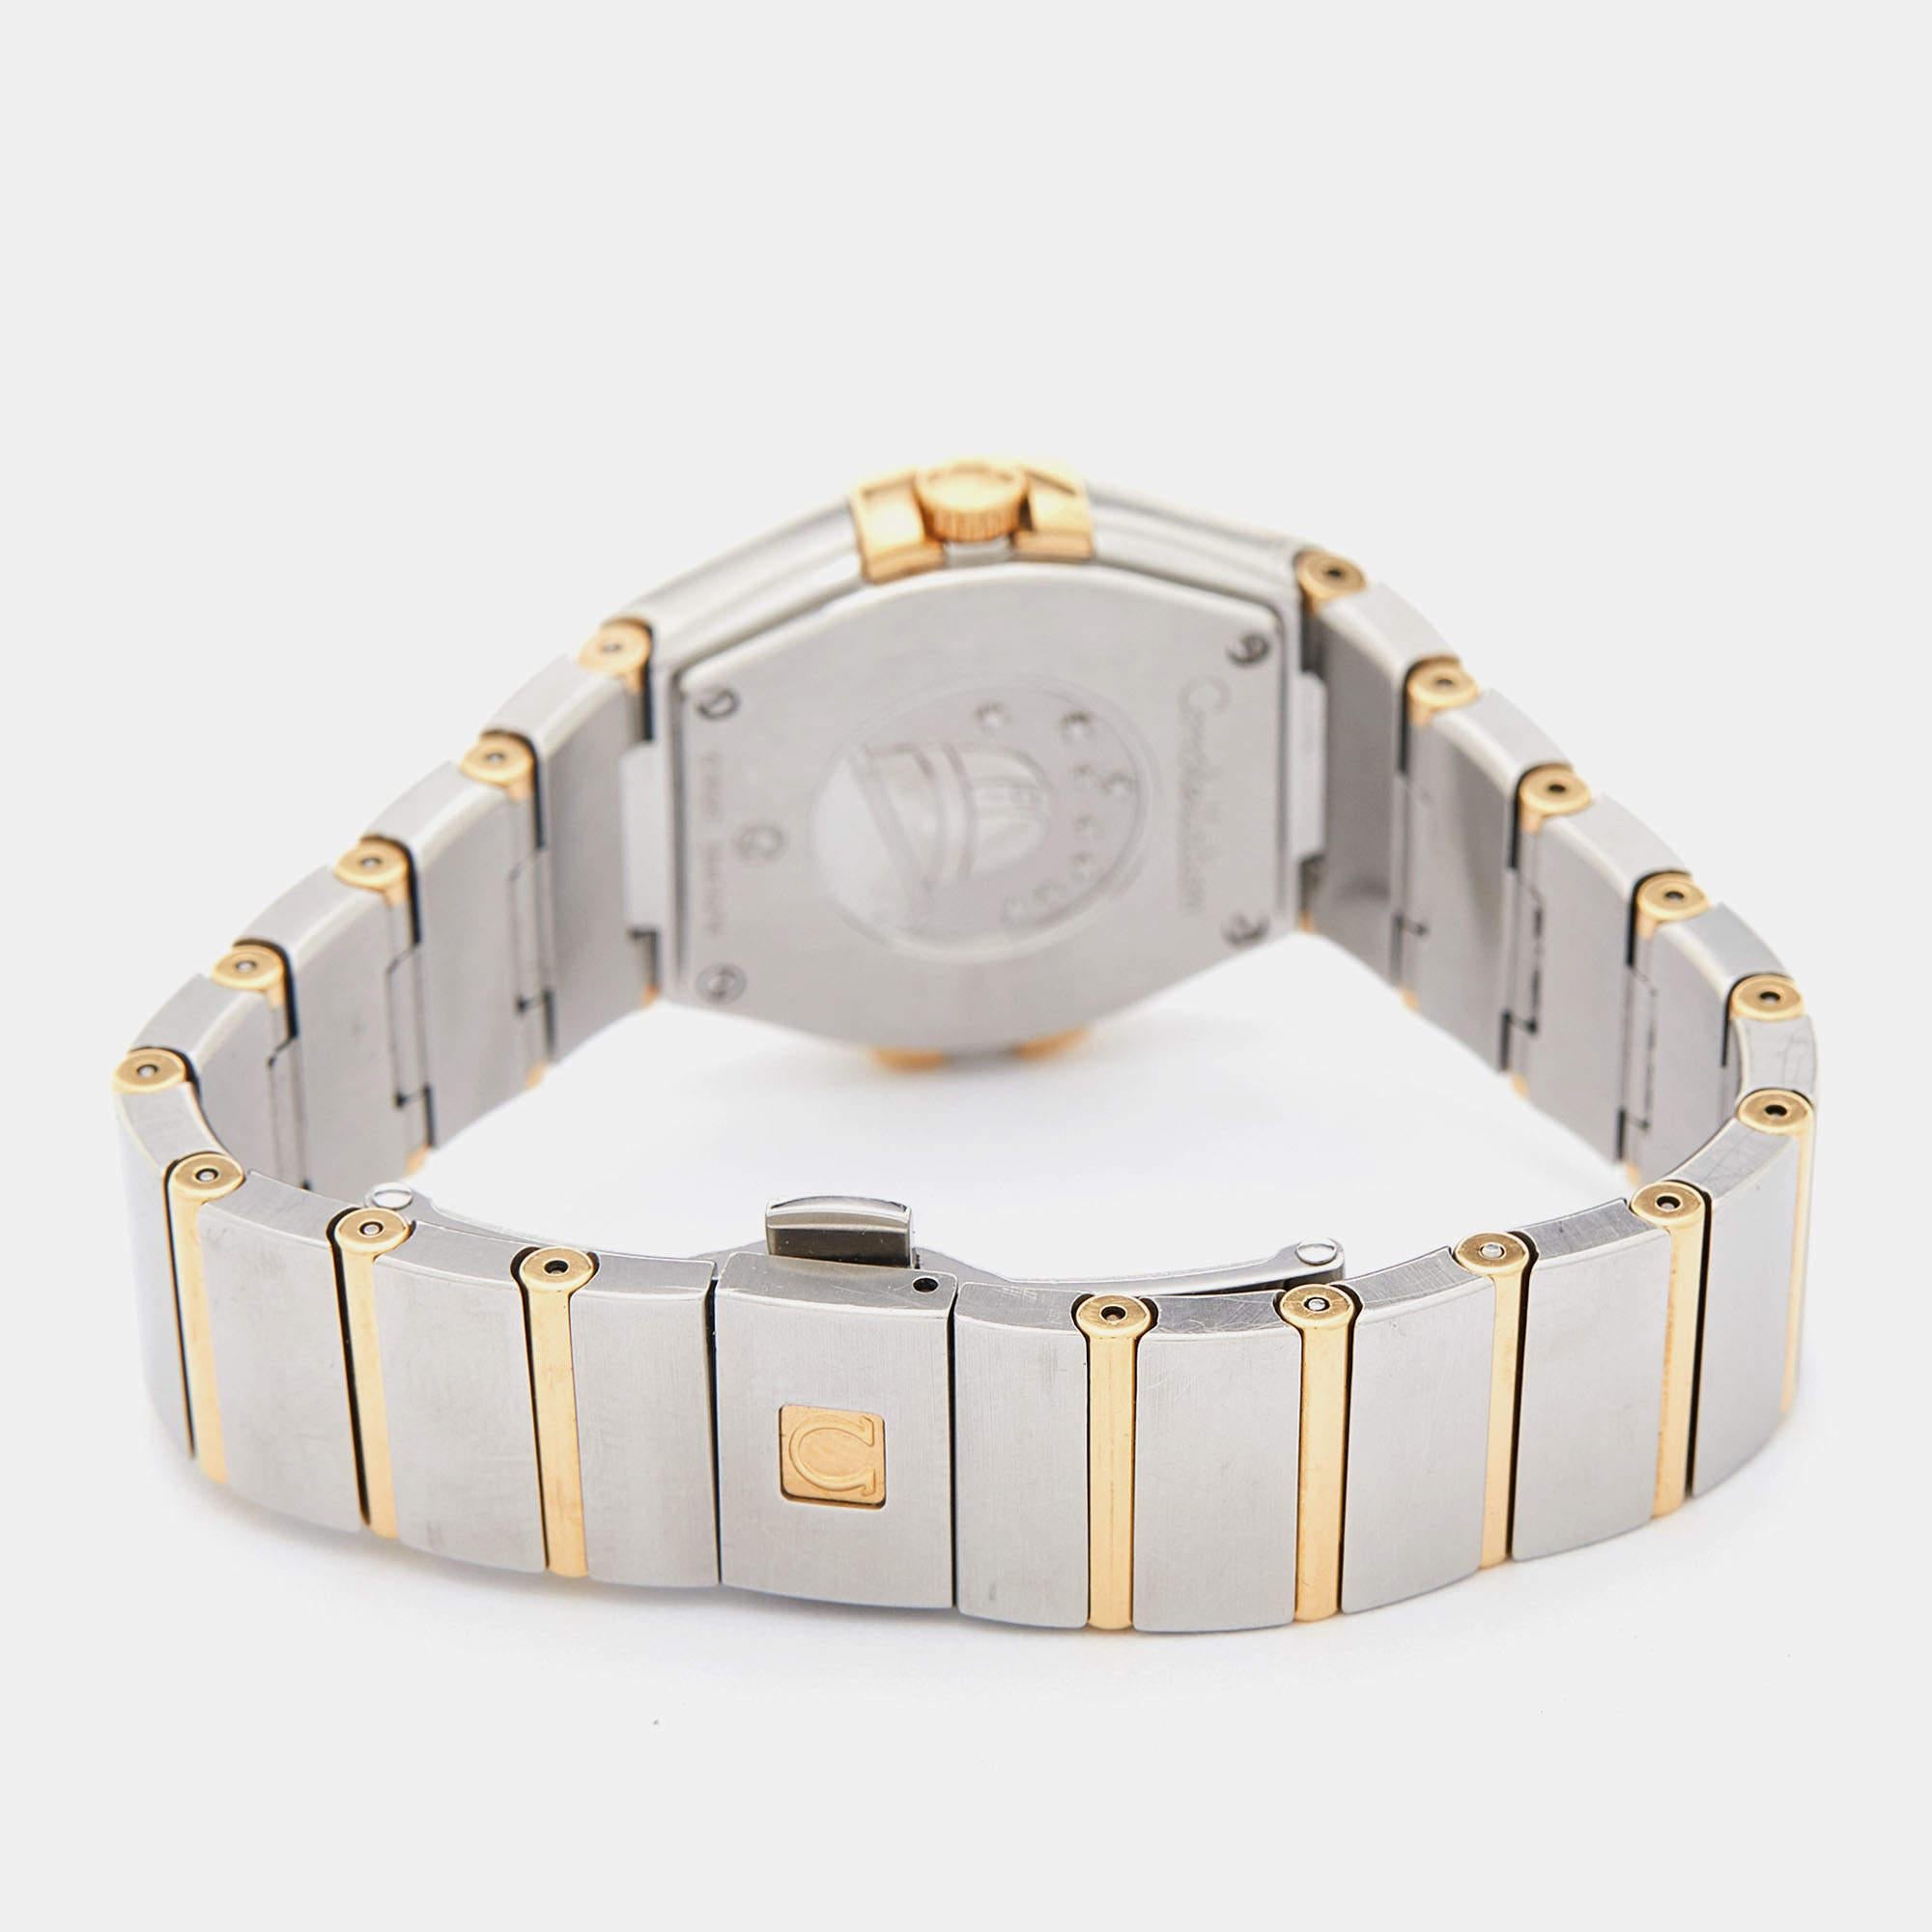 Omega brings you this gorgeous timepiece from their famous Constellation collection to flaunt on your wrist. It is crafted from 18k yellow gold & stainless steel and set with a mother-of-pearl dial and diamond hour markers.

